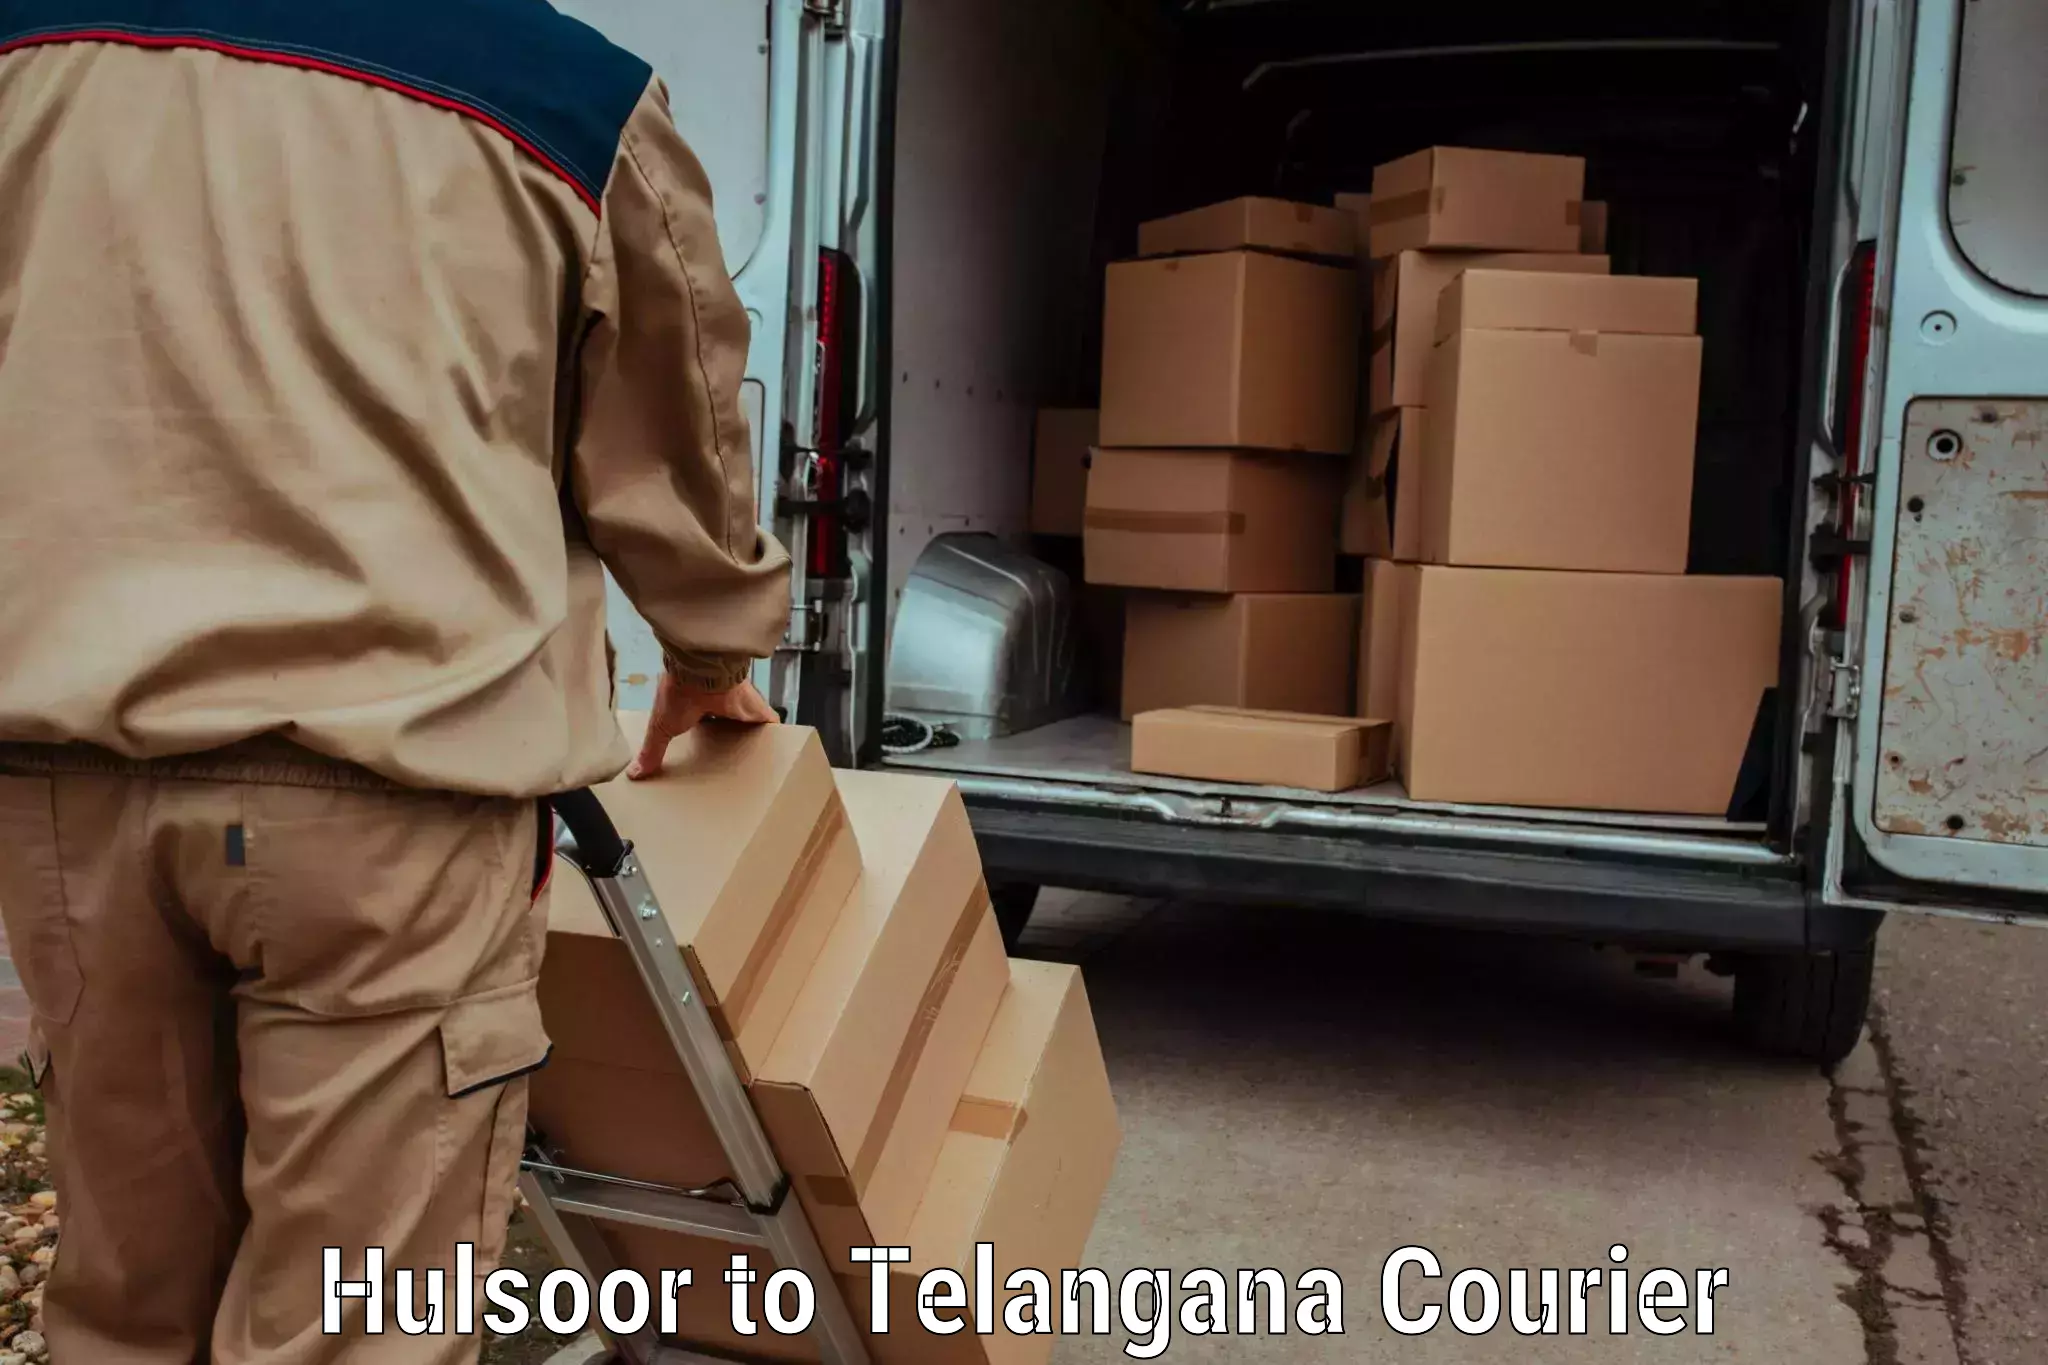 On-call courier service in Hulsoor to Gollapalli